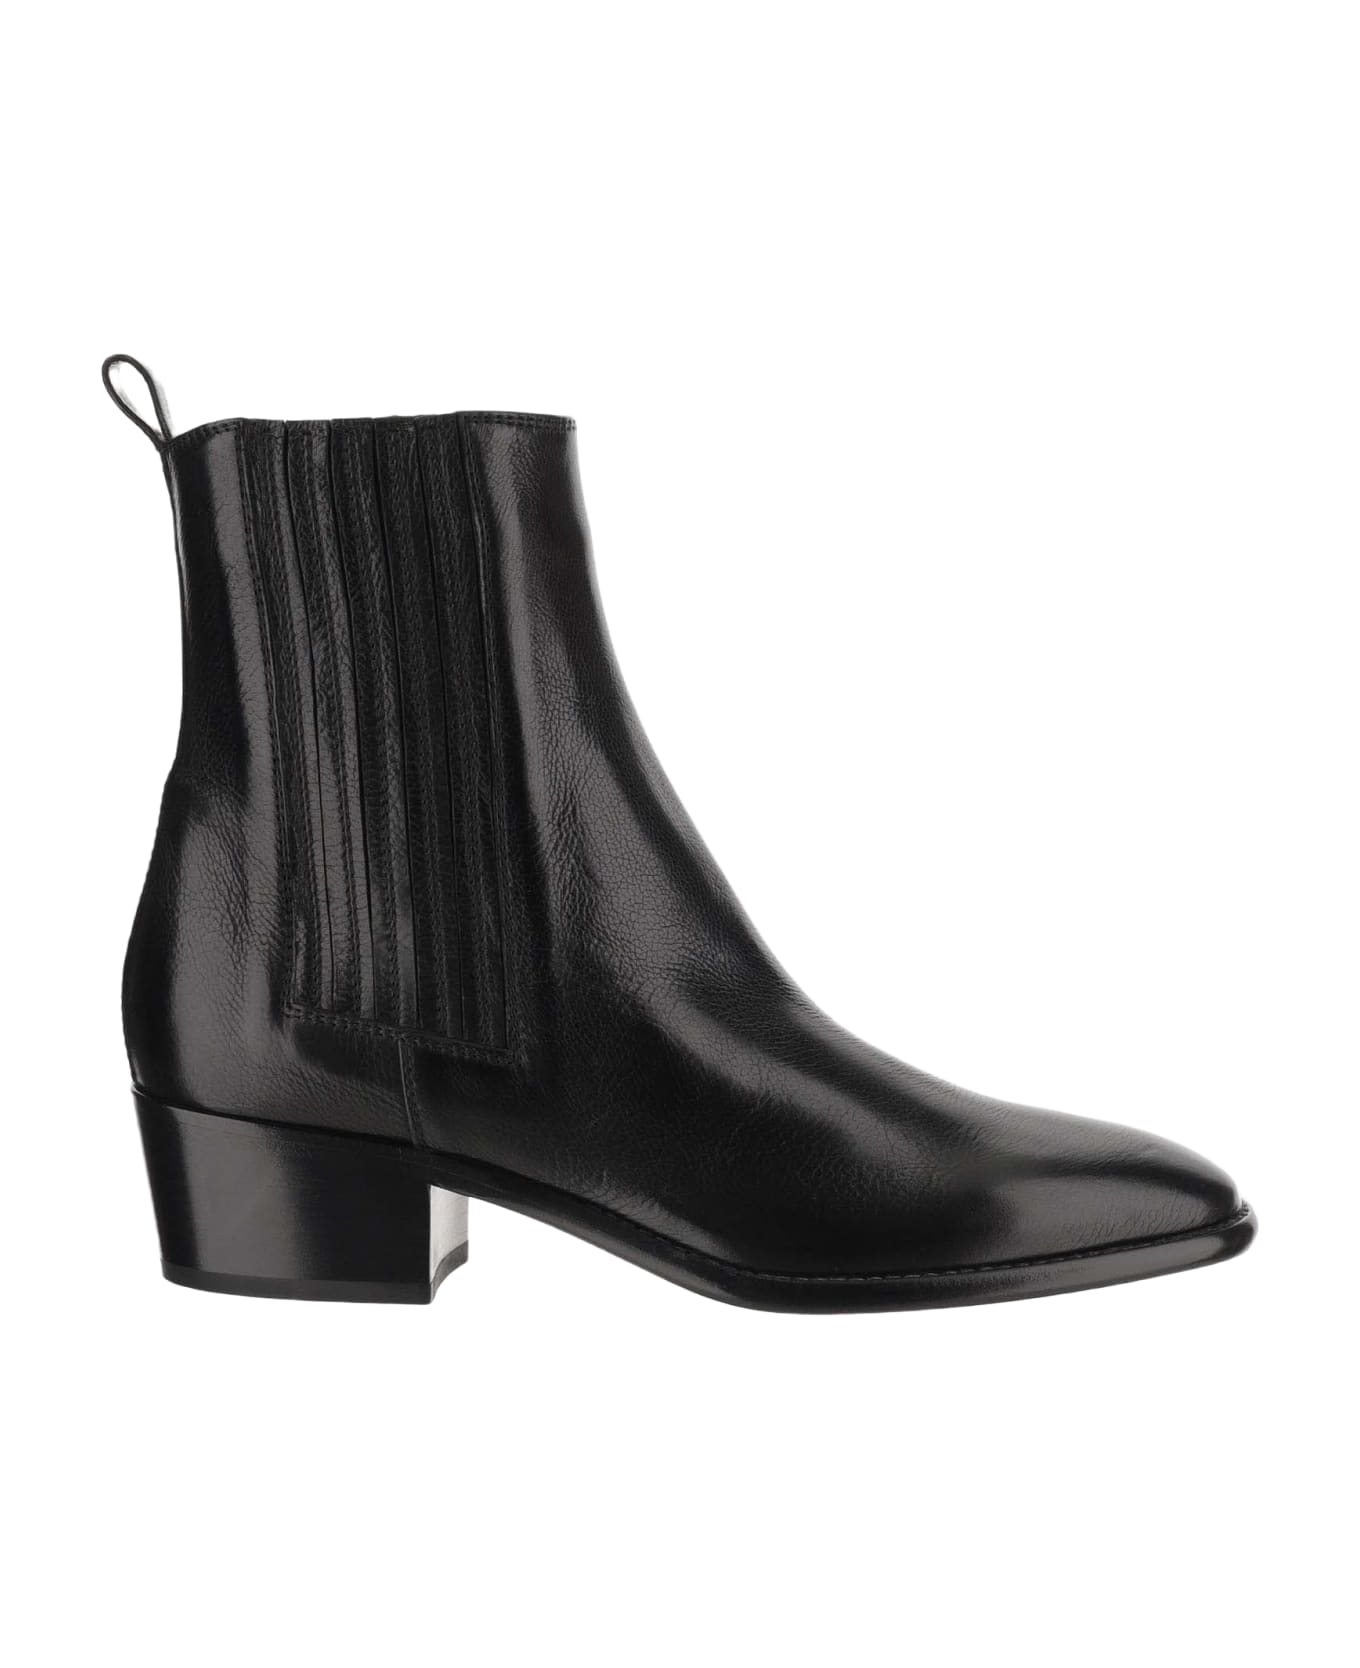 Sartore Glossy Leather Ankle Boots - Black ブーツ